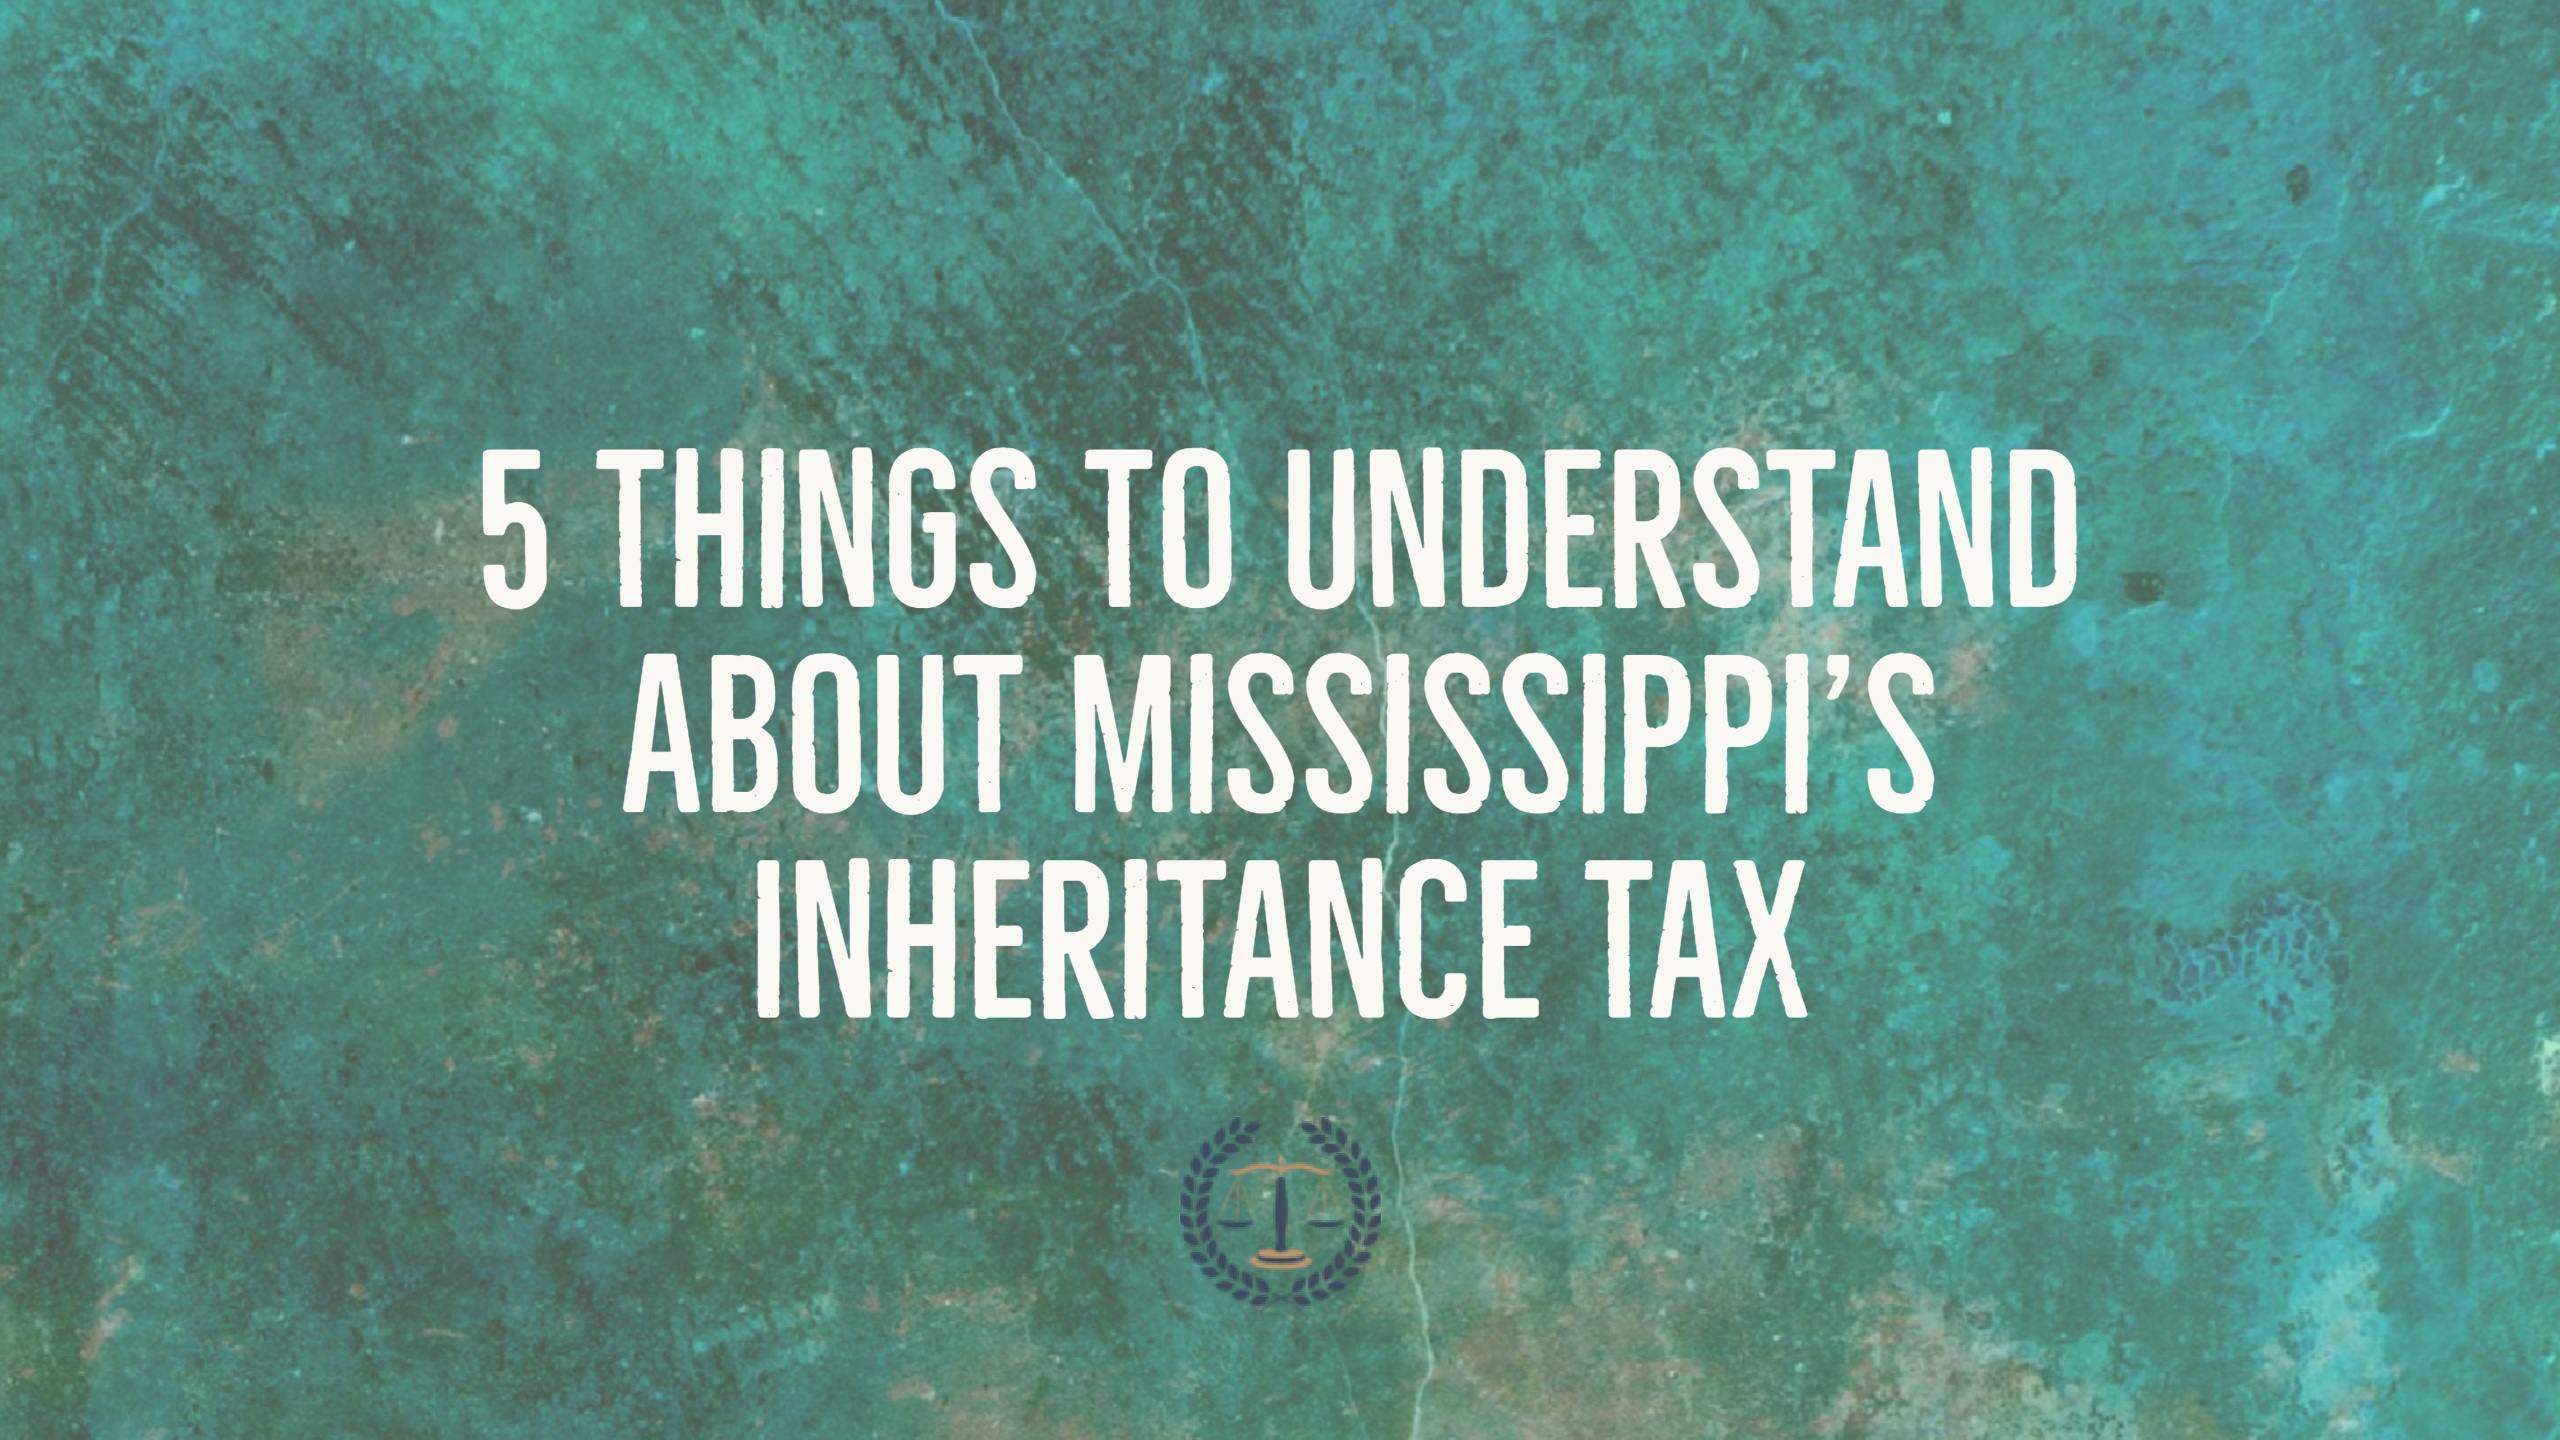 5 Things to Understand About Mississippi's Inheritance Tax